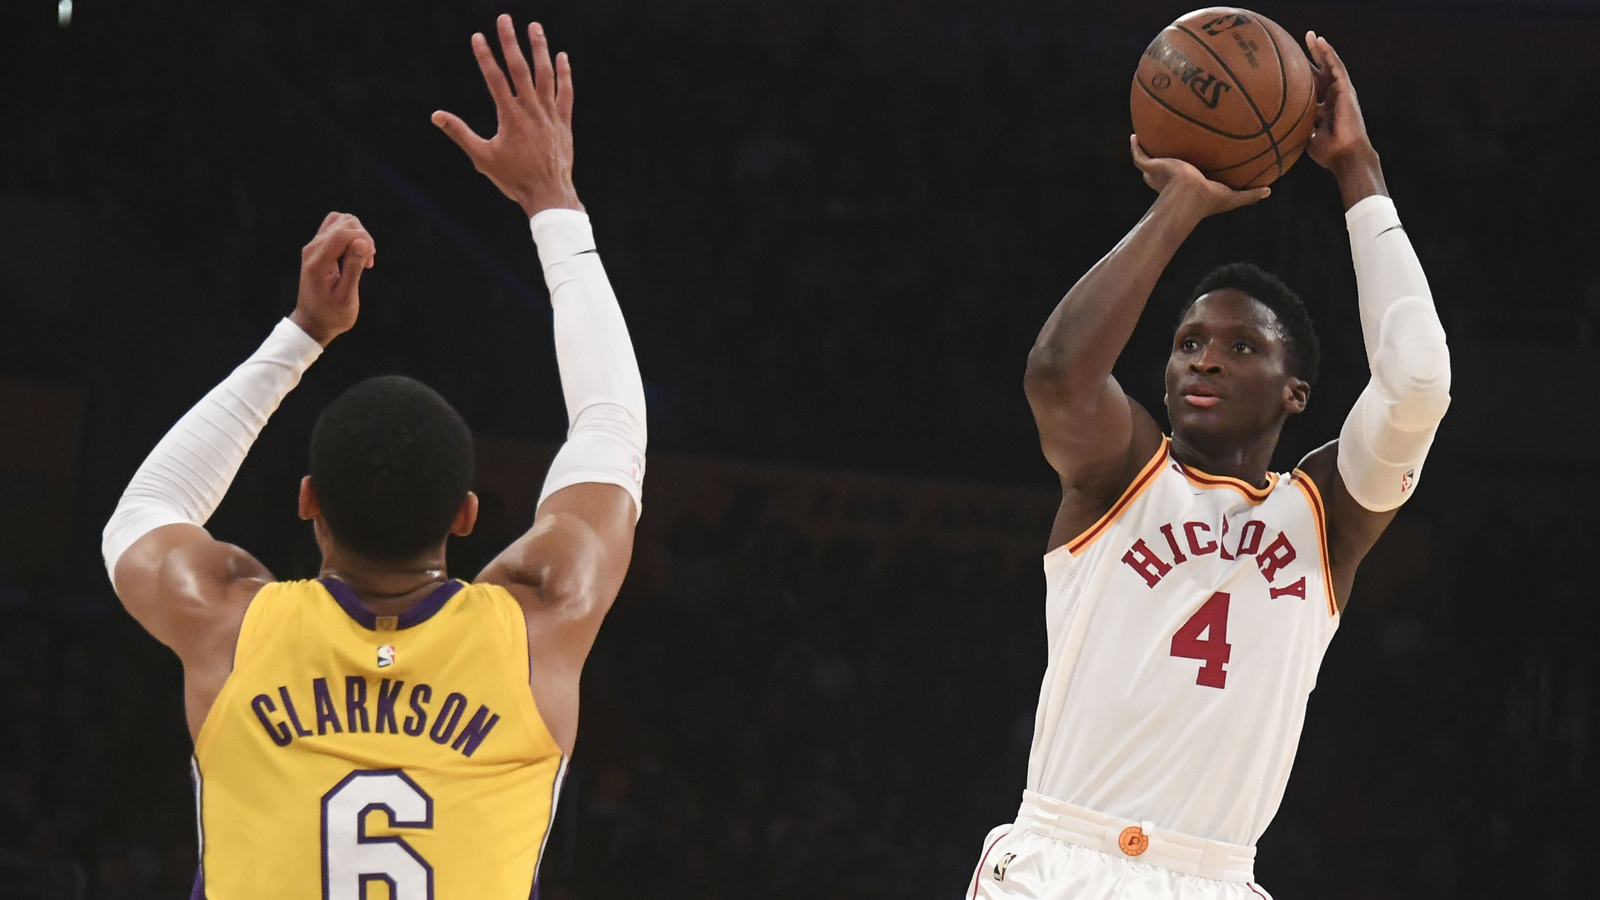 Shooting woes plague Pacers in 99-86 loss to Lakers